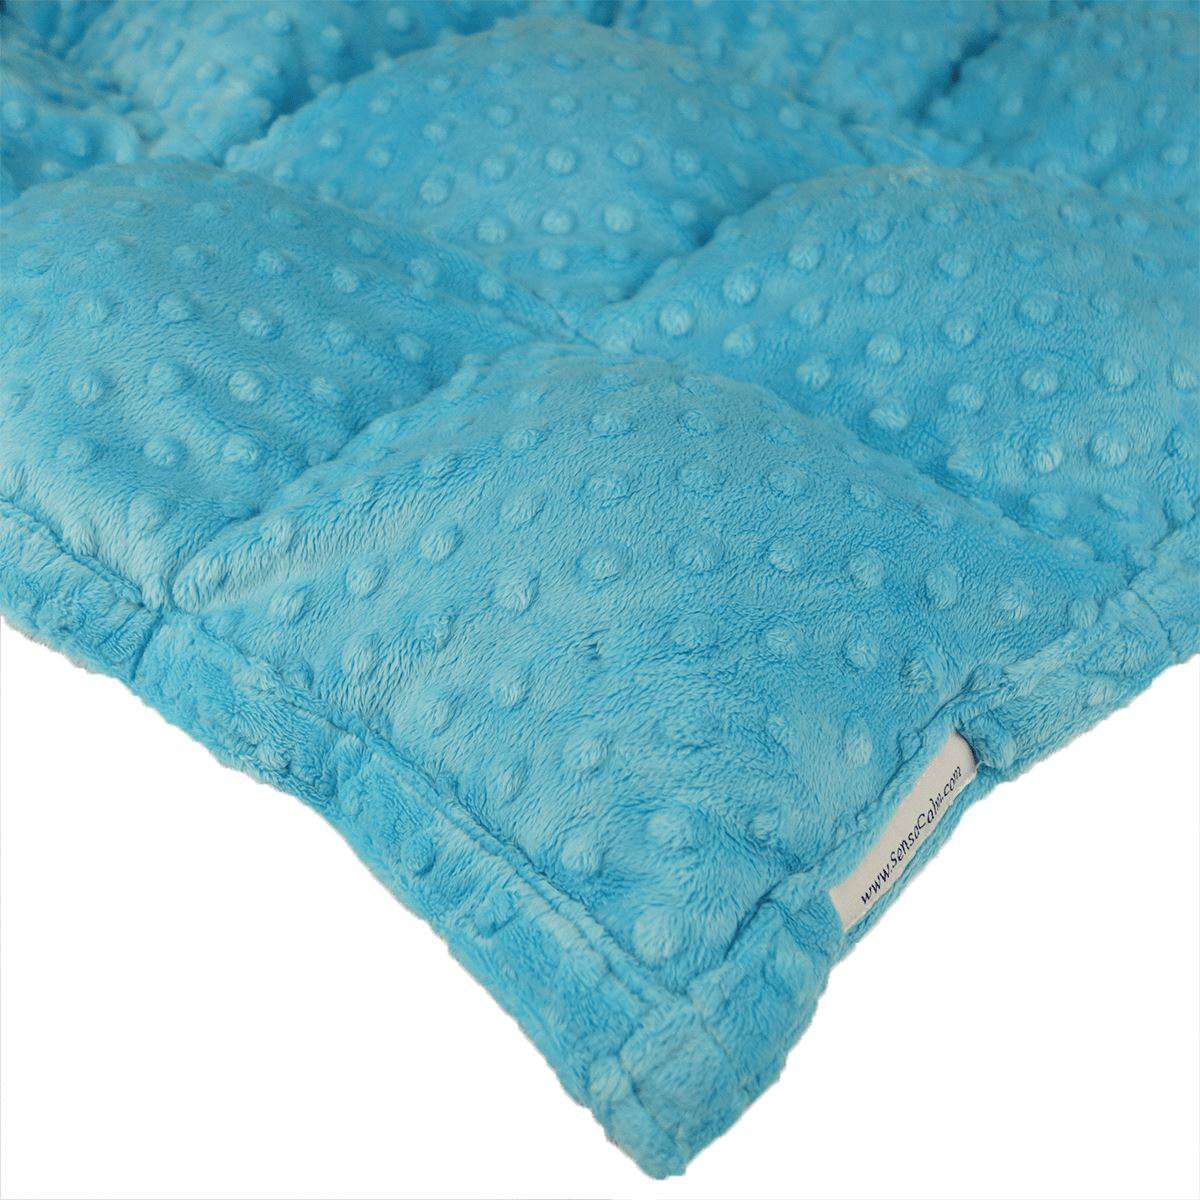 Dimple Cuddle Weighted Blanket - Turquoise